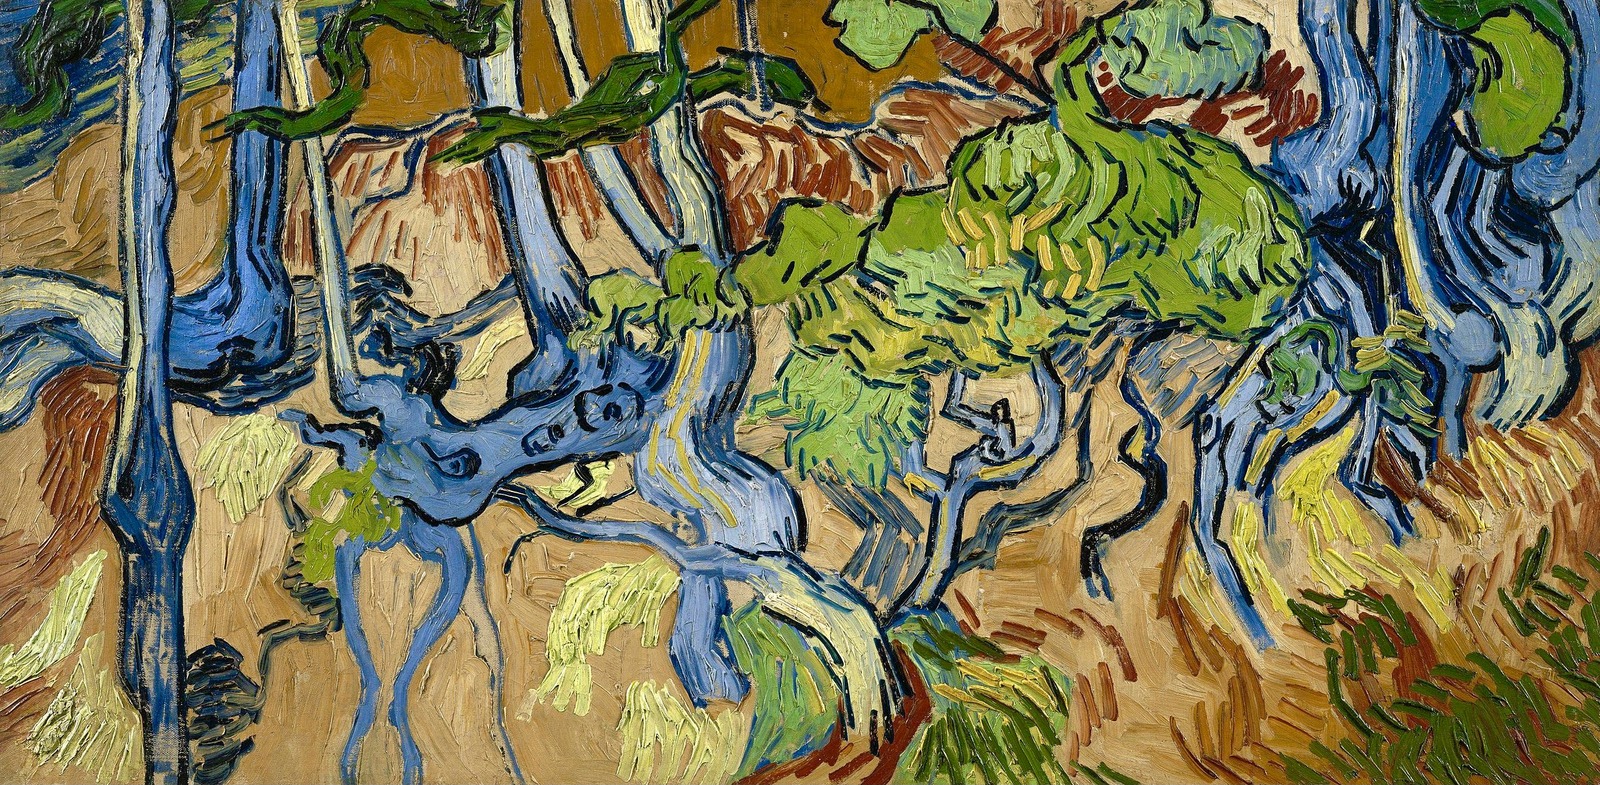 Tree Roots and Trunks, a painting by Vincent van Gogh (1890), artwork in the public domain and creative commons license through Wikipedia